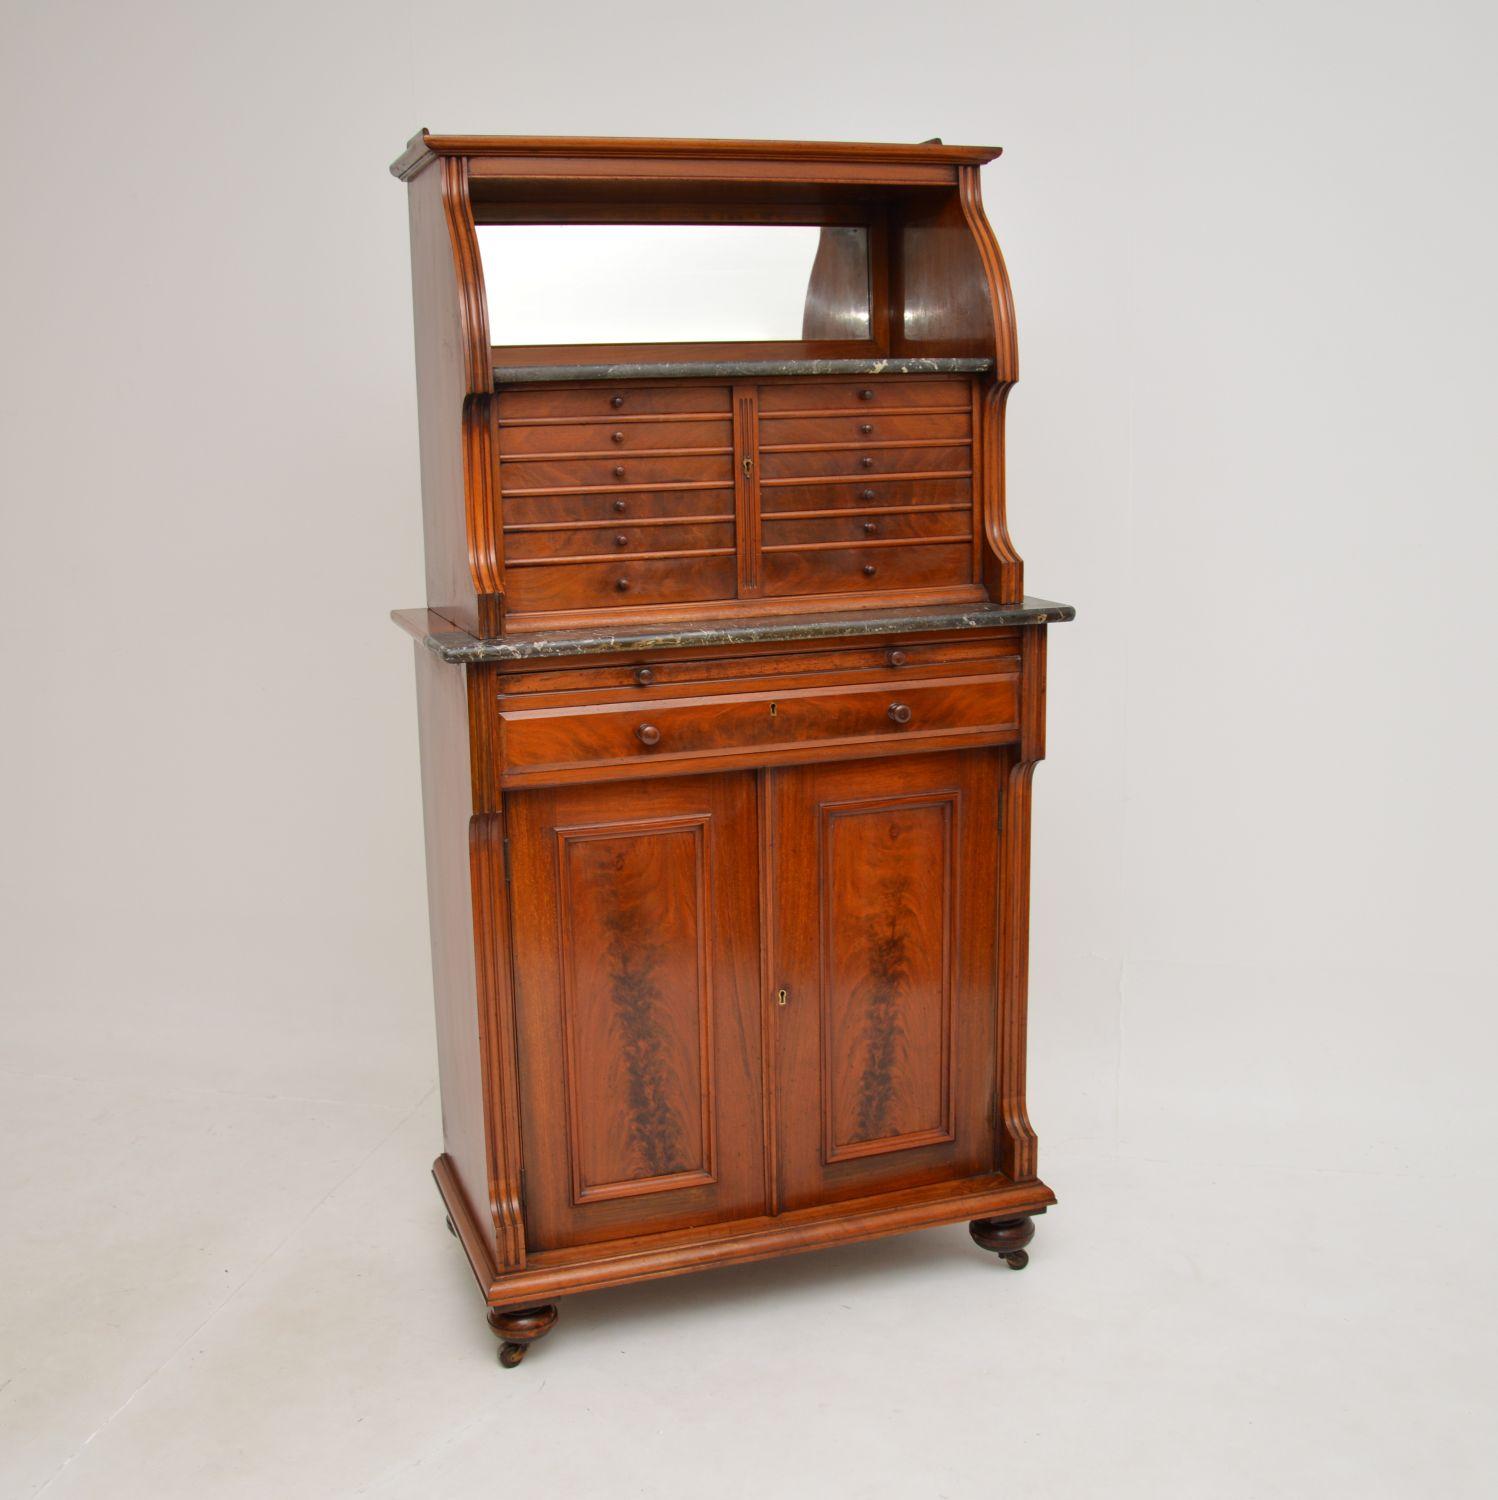 A wonderful antique Victorian dentist cabinet. This was made in England, it dates from around the 1860-1880 period. There is a makers label inside the door, which reads ‘Cash and Sons Ltd’, who were well known dental suppliers of the period.

The